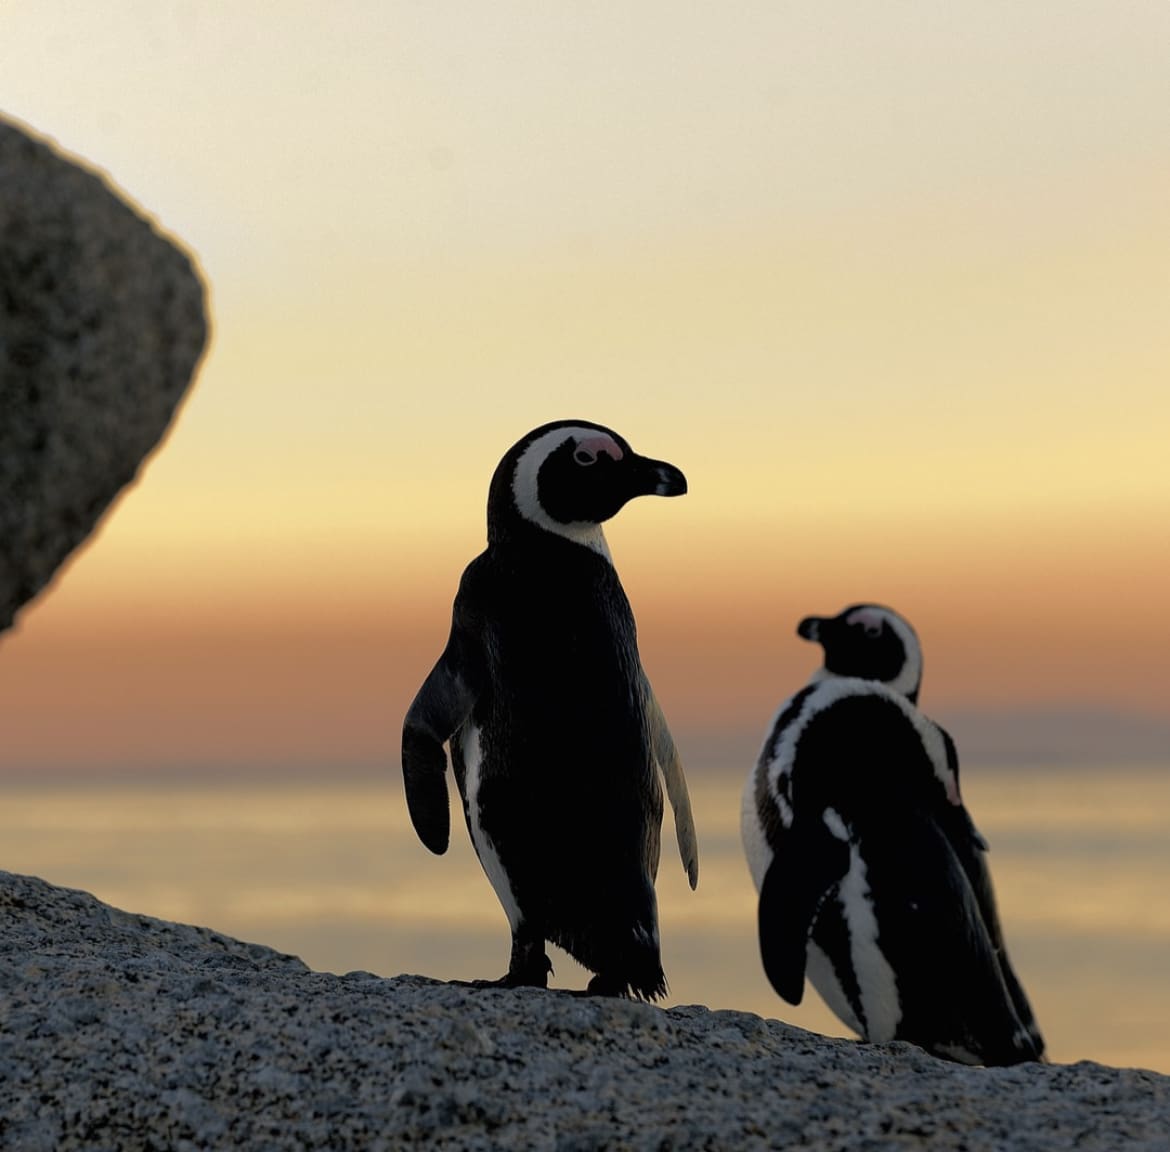 Penguins at sunrise in South Africa